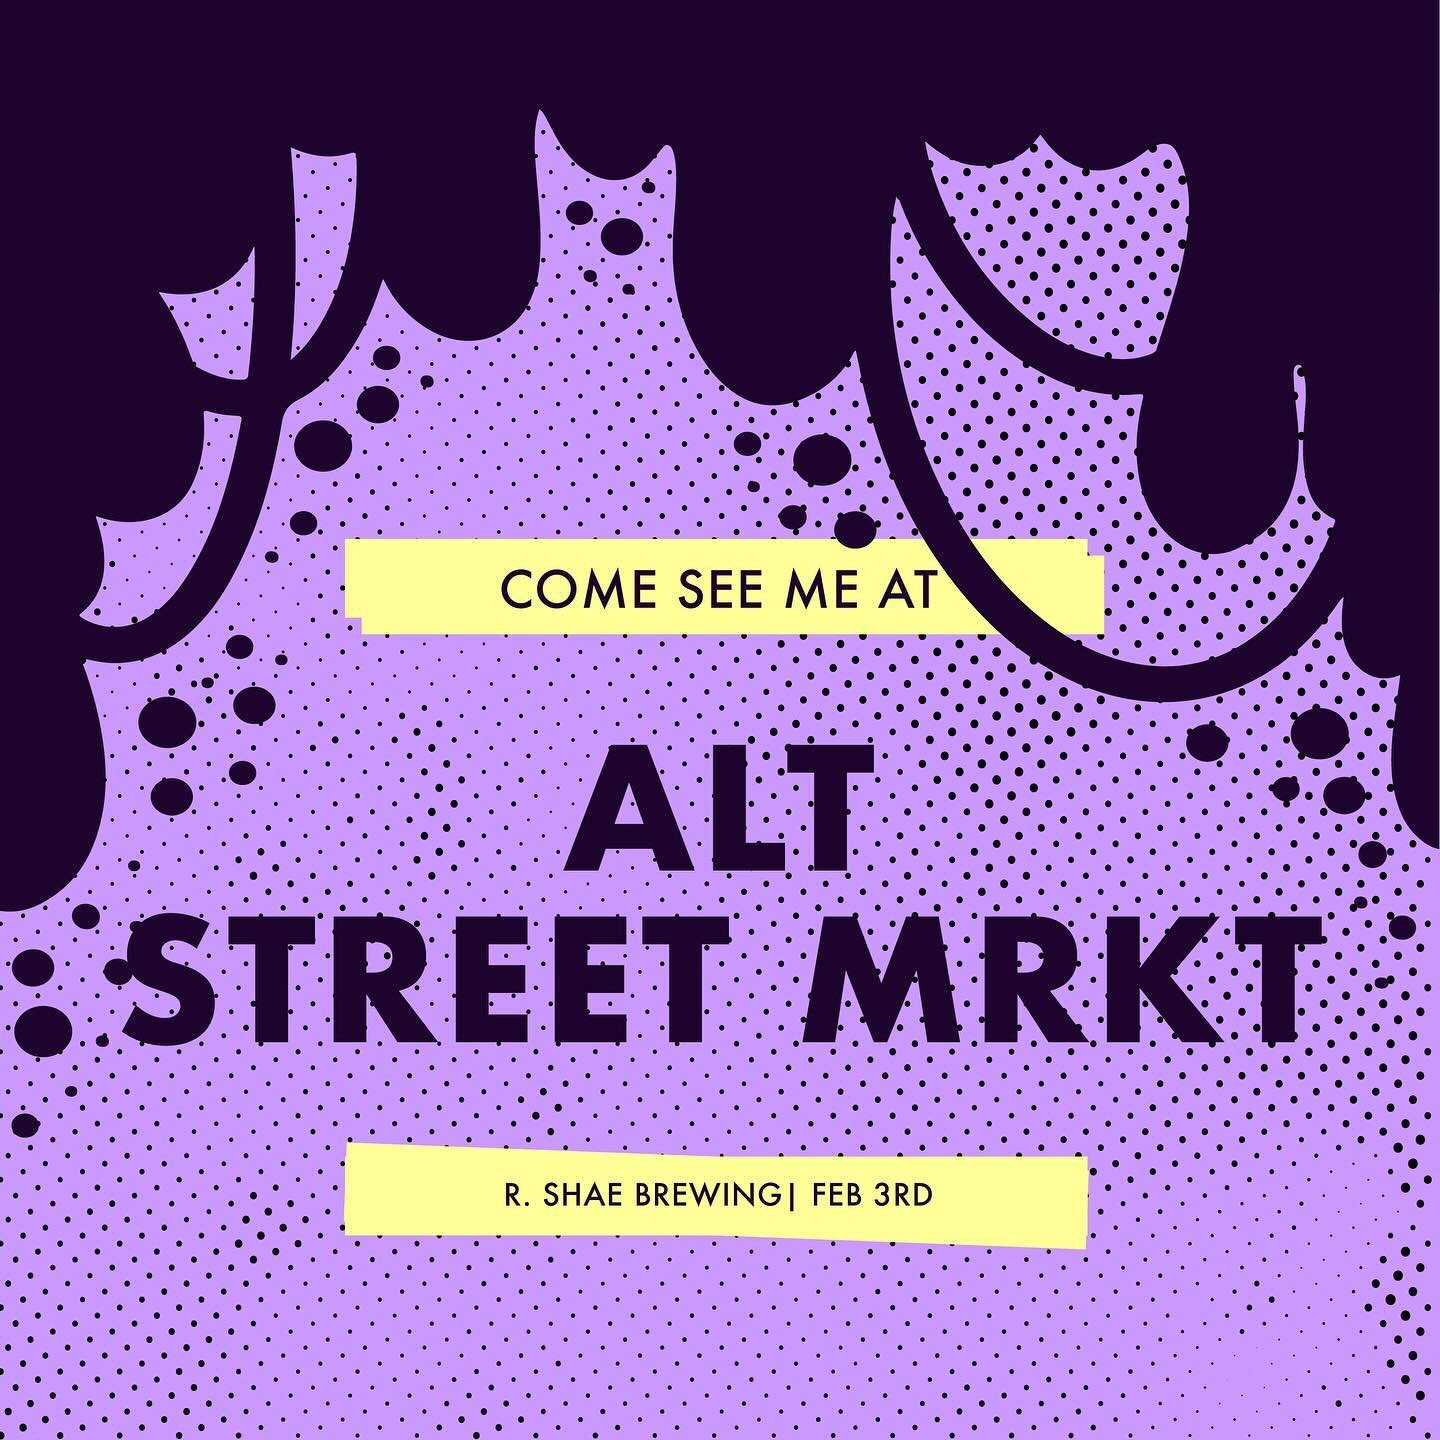 THIS WEEKEND come see me at @altstreetmarket at @rsheabrewing in Akron, Ohio Saturday February 3rd! This is an in person, alternative Valentine&rsquo;s Day Market. I will have NEW NEW NEW art to share with you all!

I can&rsquo;t wait to see your spo